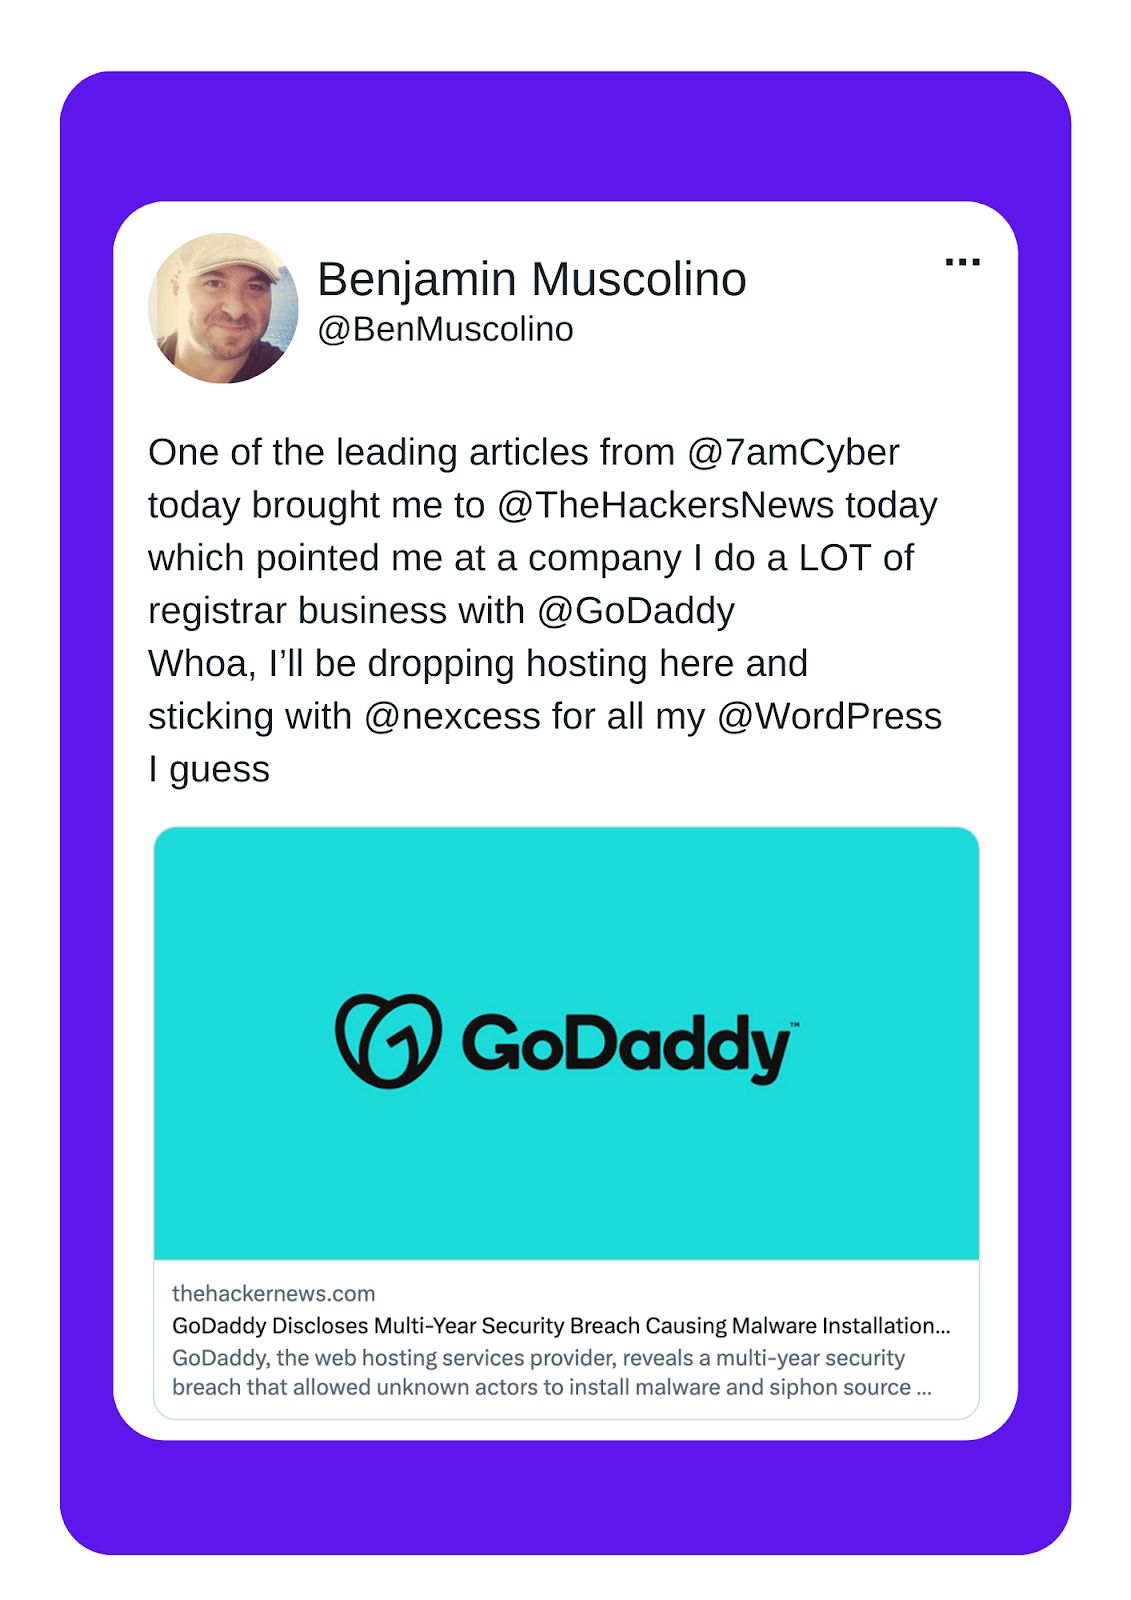 A tweet from Benjamin Muscolino layered over a purple background that reads One of the leading articles from @7amCyber today brought me to @TheHackersNews today which pointed me at a company I do a LOT of registrar business with @GoDaddy. Whoa. I'll be dropping hosting here and sticking with @nexcess for all my WordPress I guess." Beneath that is a link to a thehackersnew.com article.